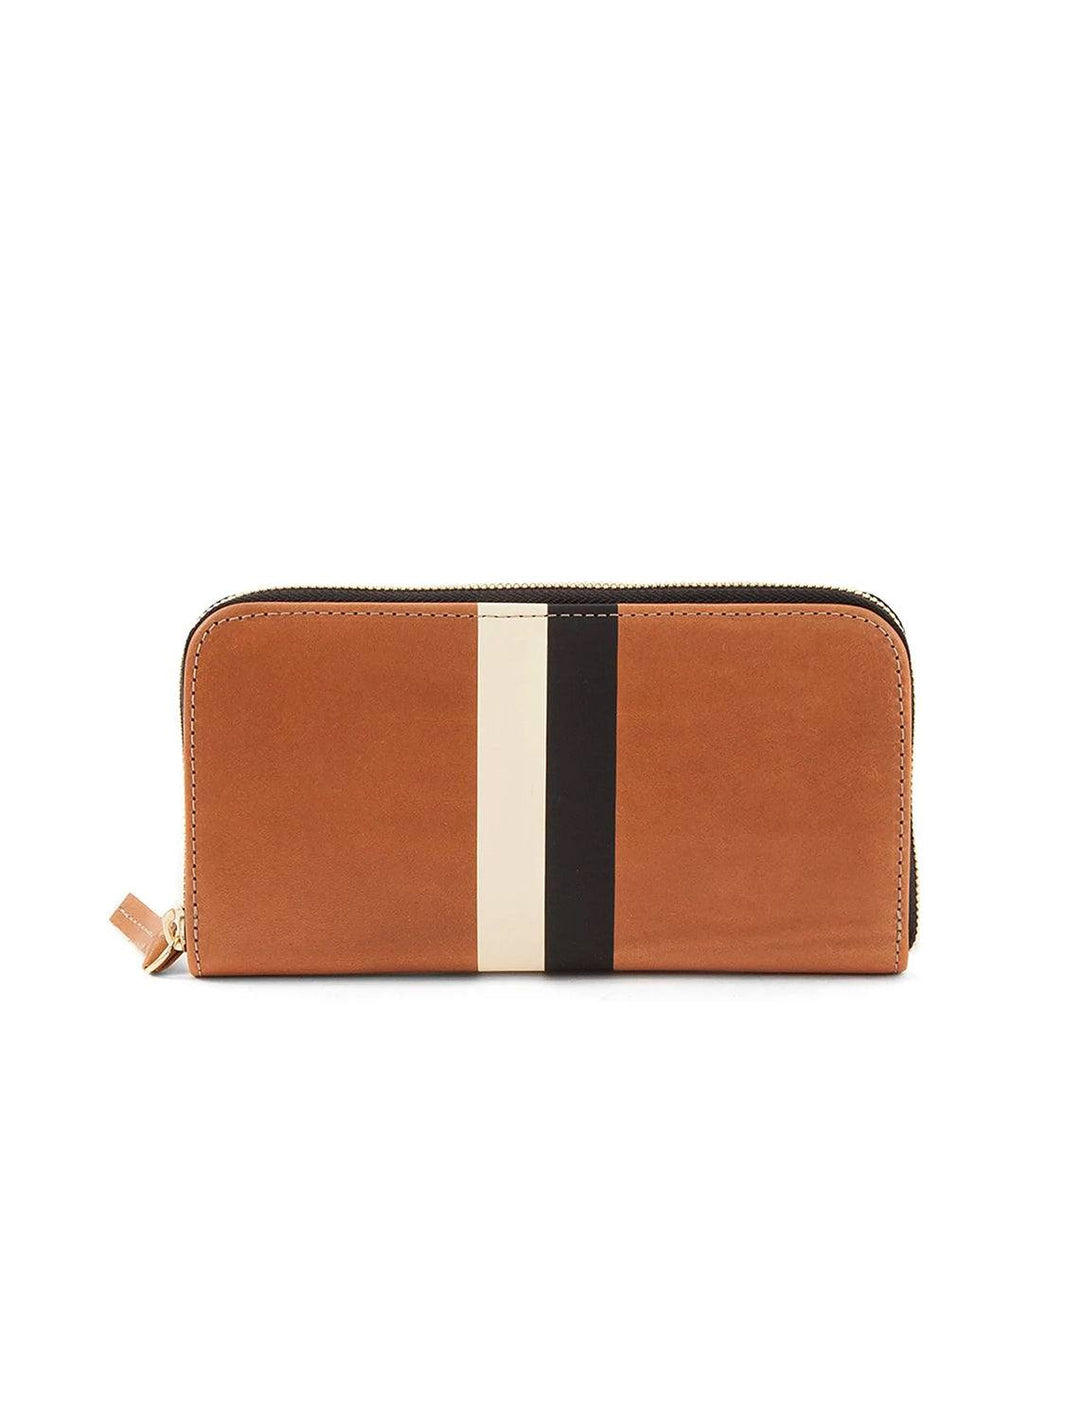 Front view of Clare V.'s zip wallet in vachetta and black and cream stripe.